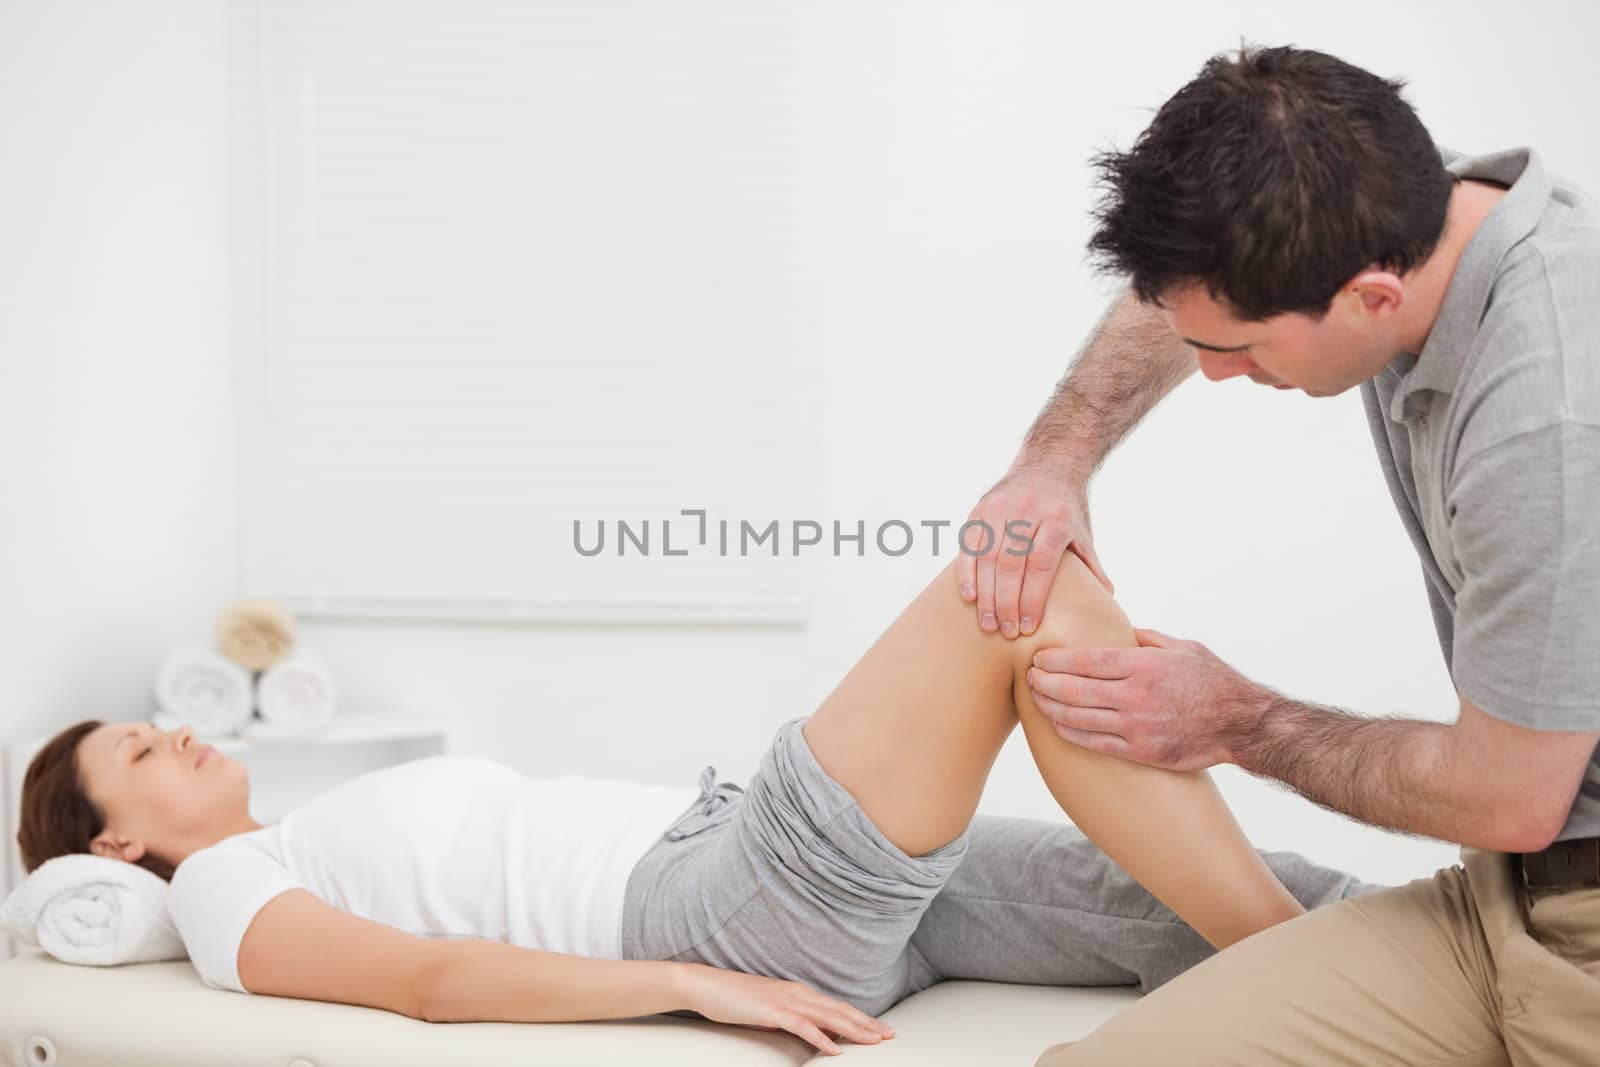 Brown-haired man massaging the knee of a woman in a room